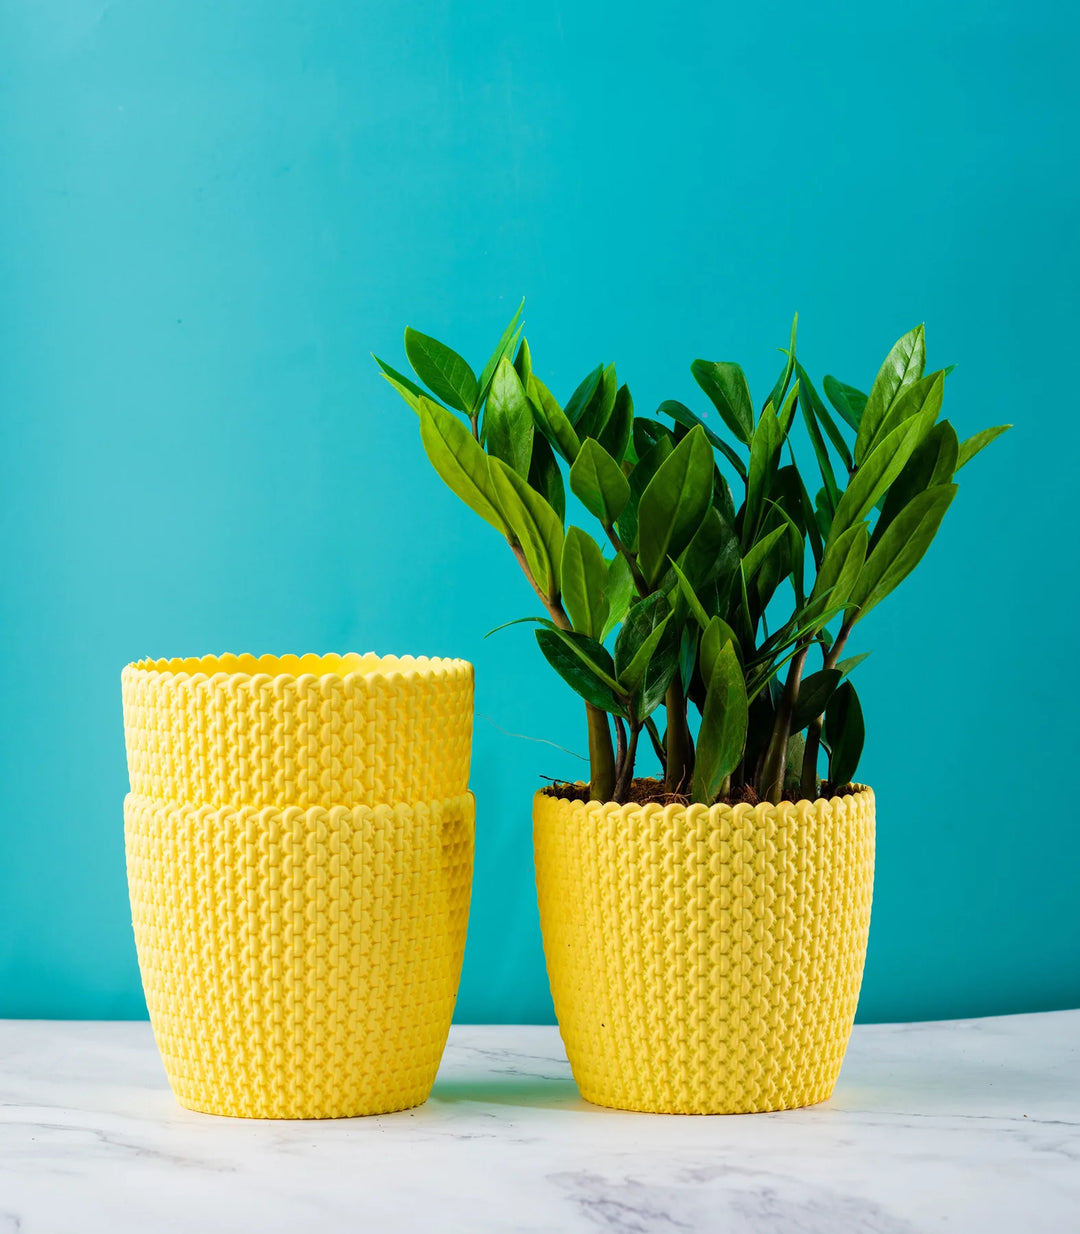 Abstract Fiber Planters Pack | Textured Yellow Purl Fiber Planters Pack